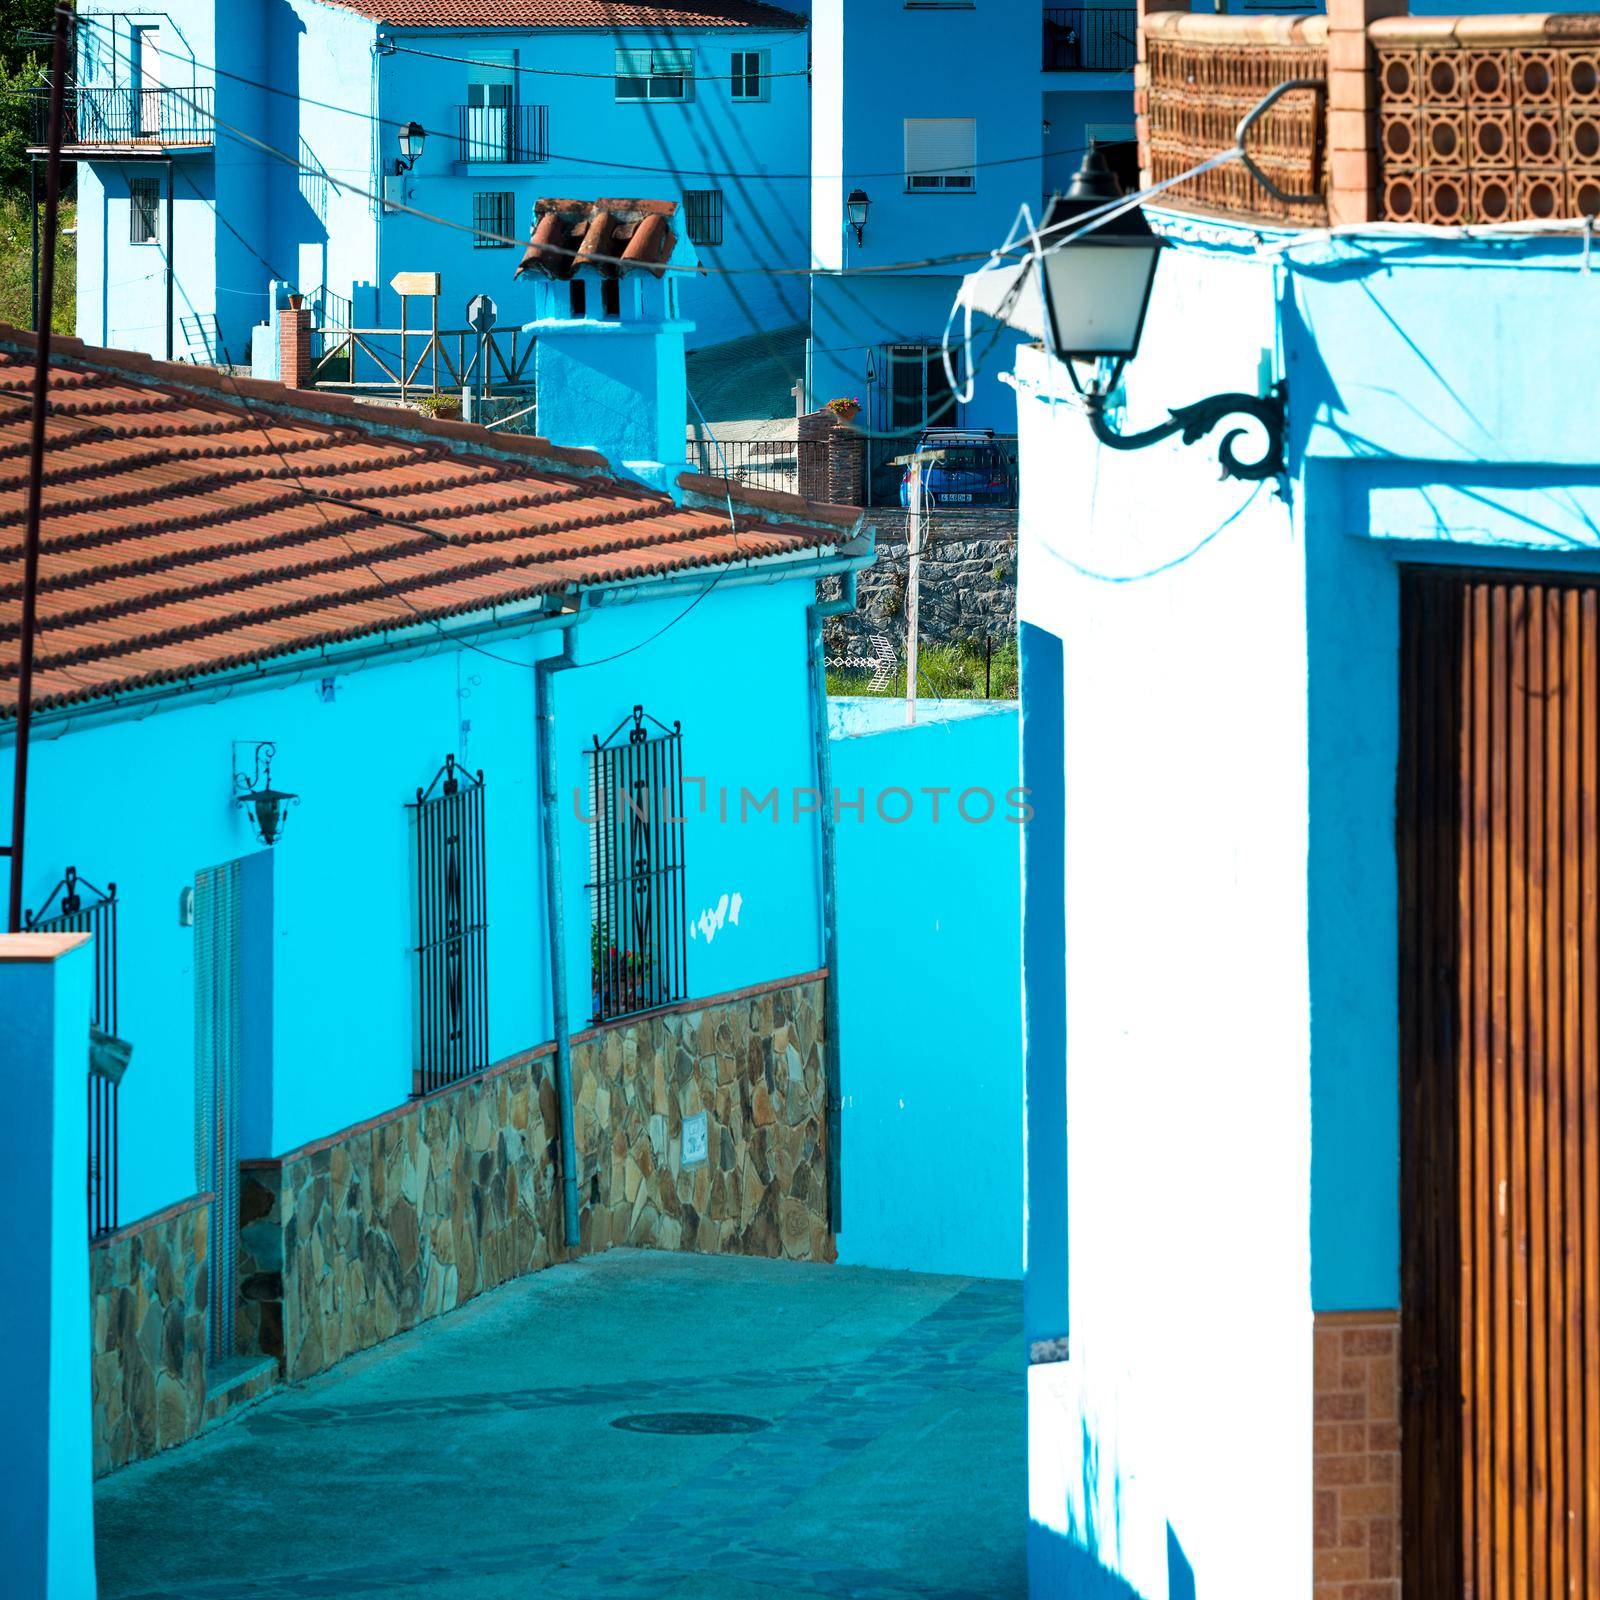 Juzcar, blue Andalusian village in Malaga, Spain. village was painted blue for The Smurfs movie launch